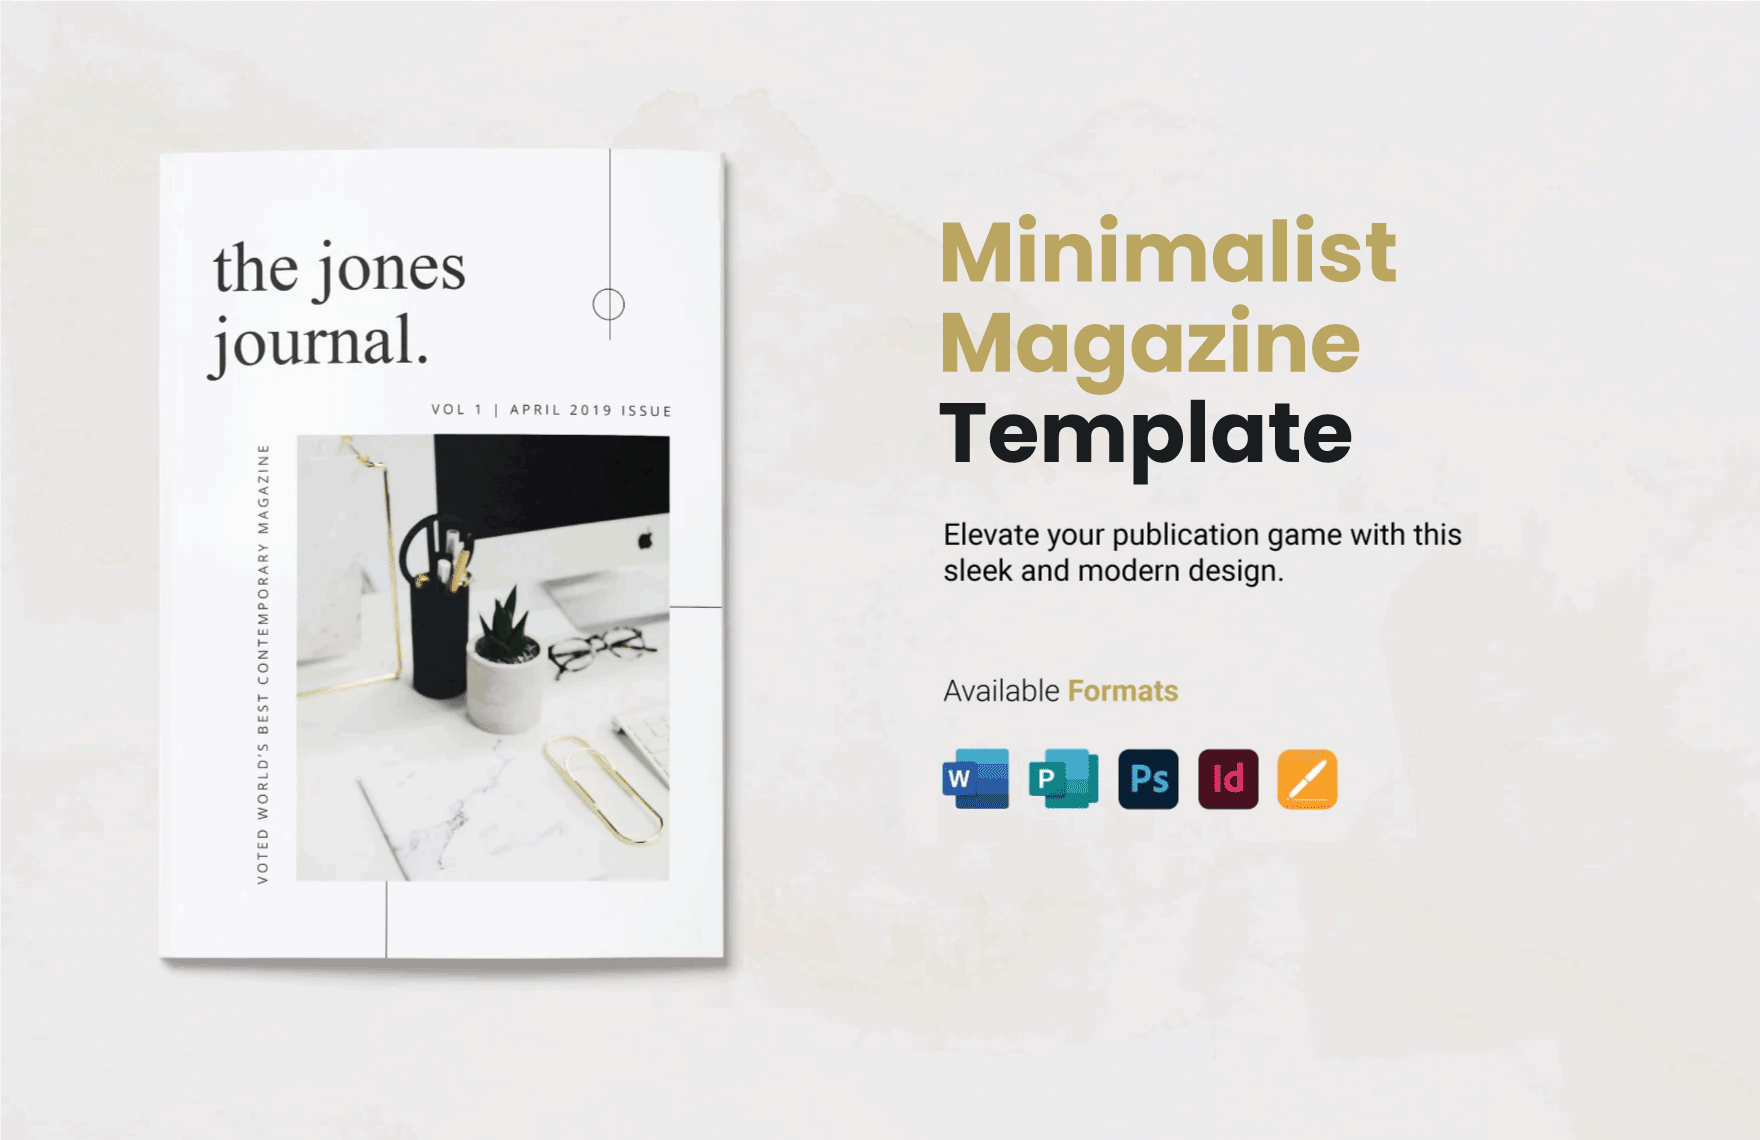 Free Minimalist Magazine Template in Word, PSD, Apple Pages, Publisher, InDesign